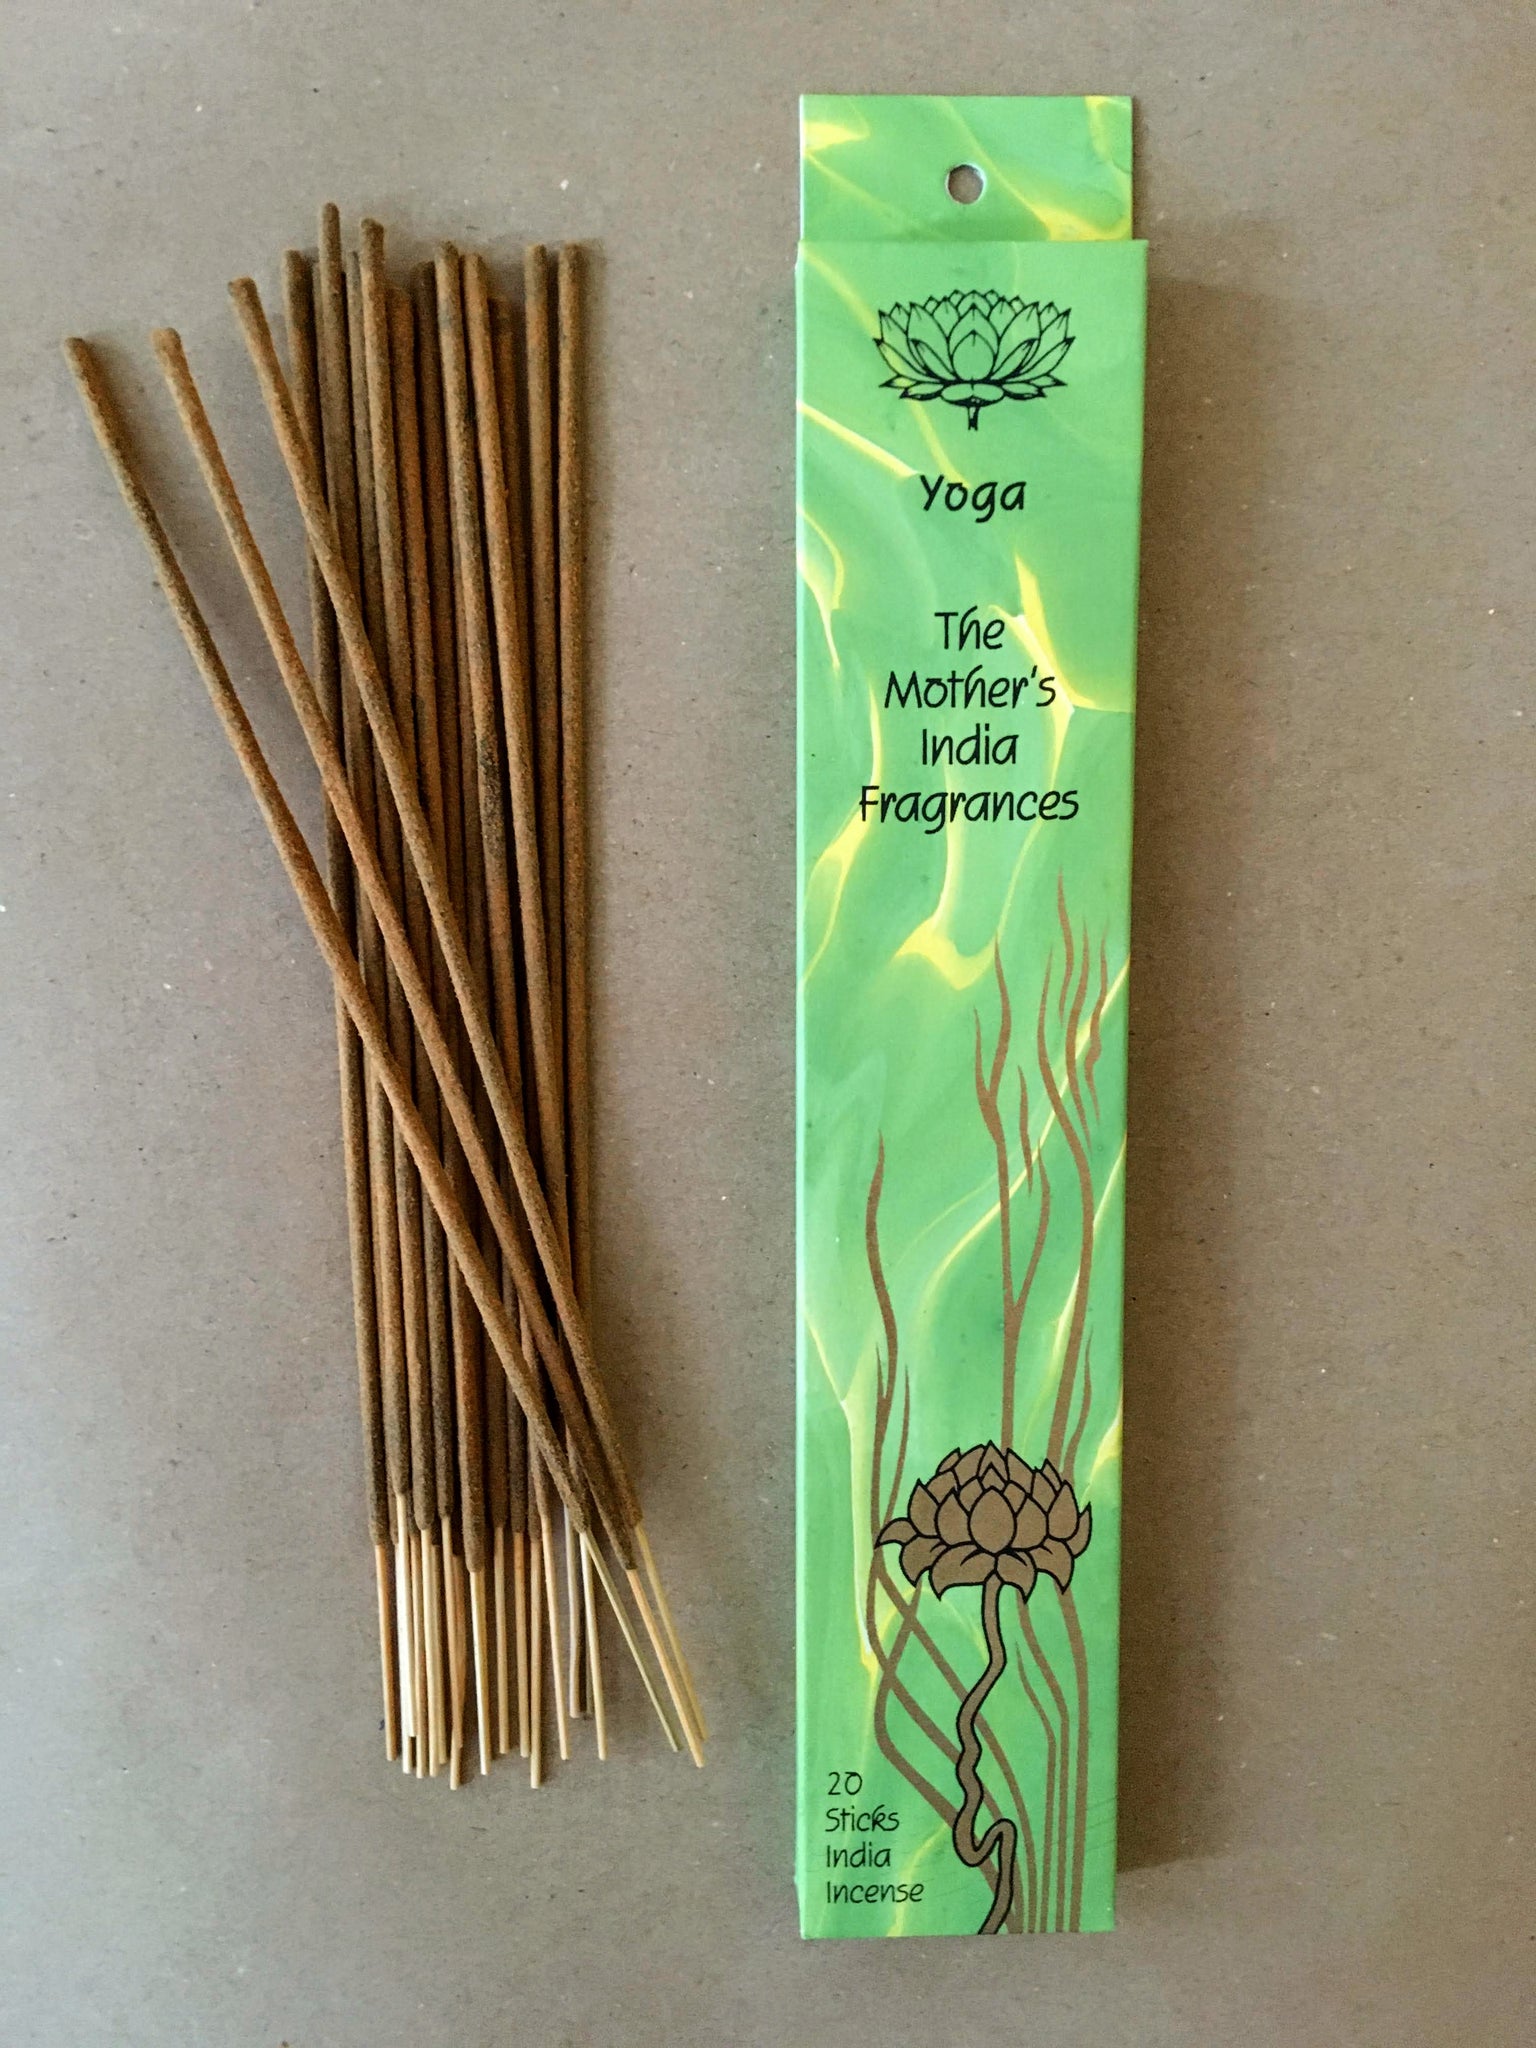 Yoga | The Mother's India Fragrances Incense